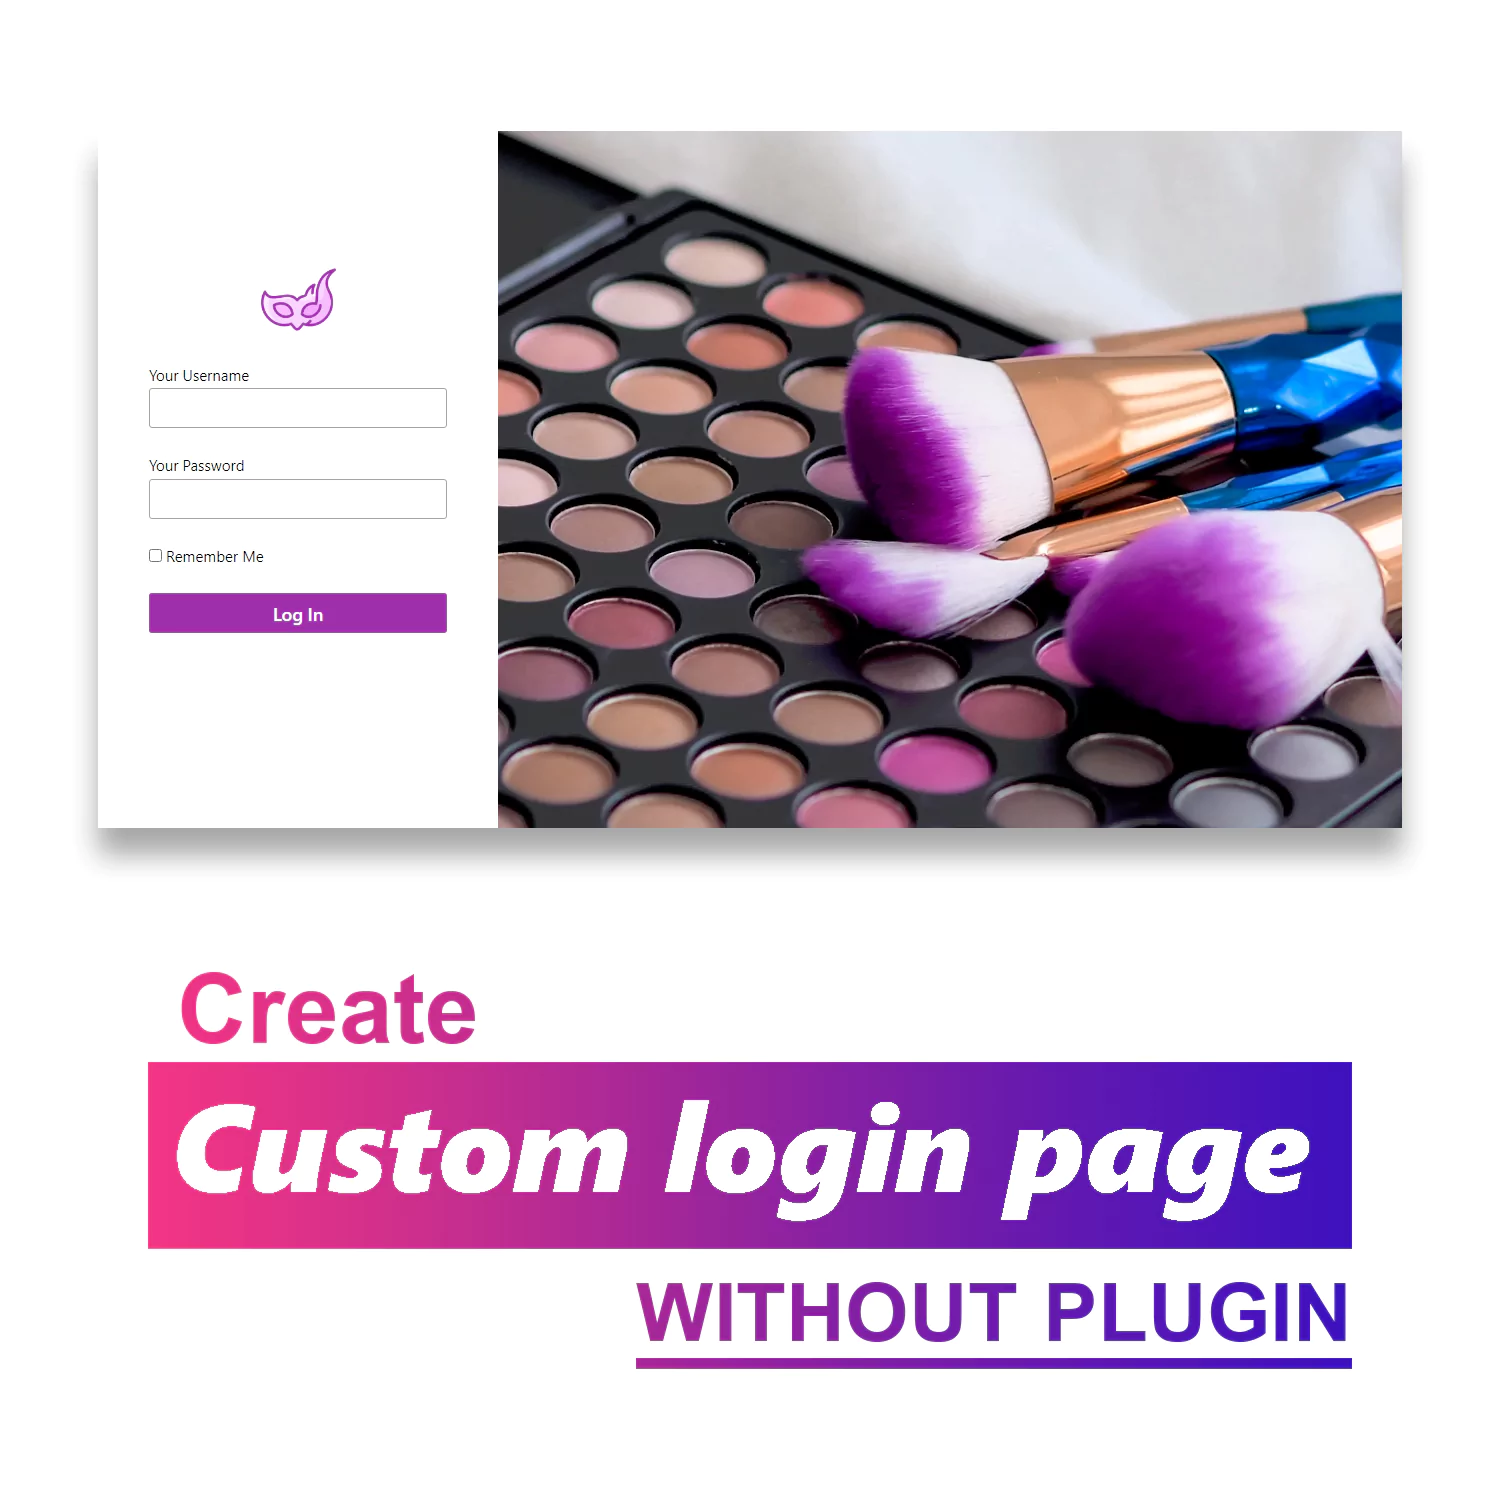 How to create Custom login page in WordPress without plugin [fast and easy]